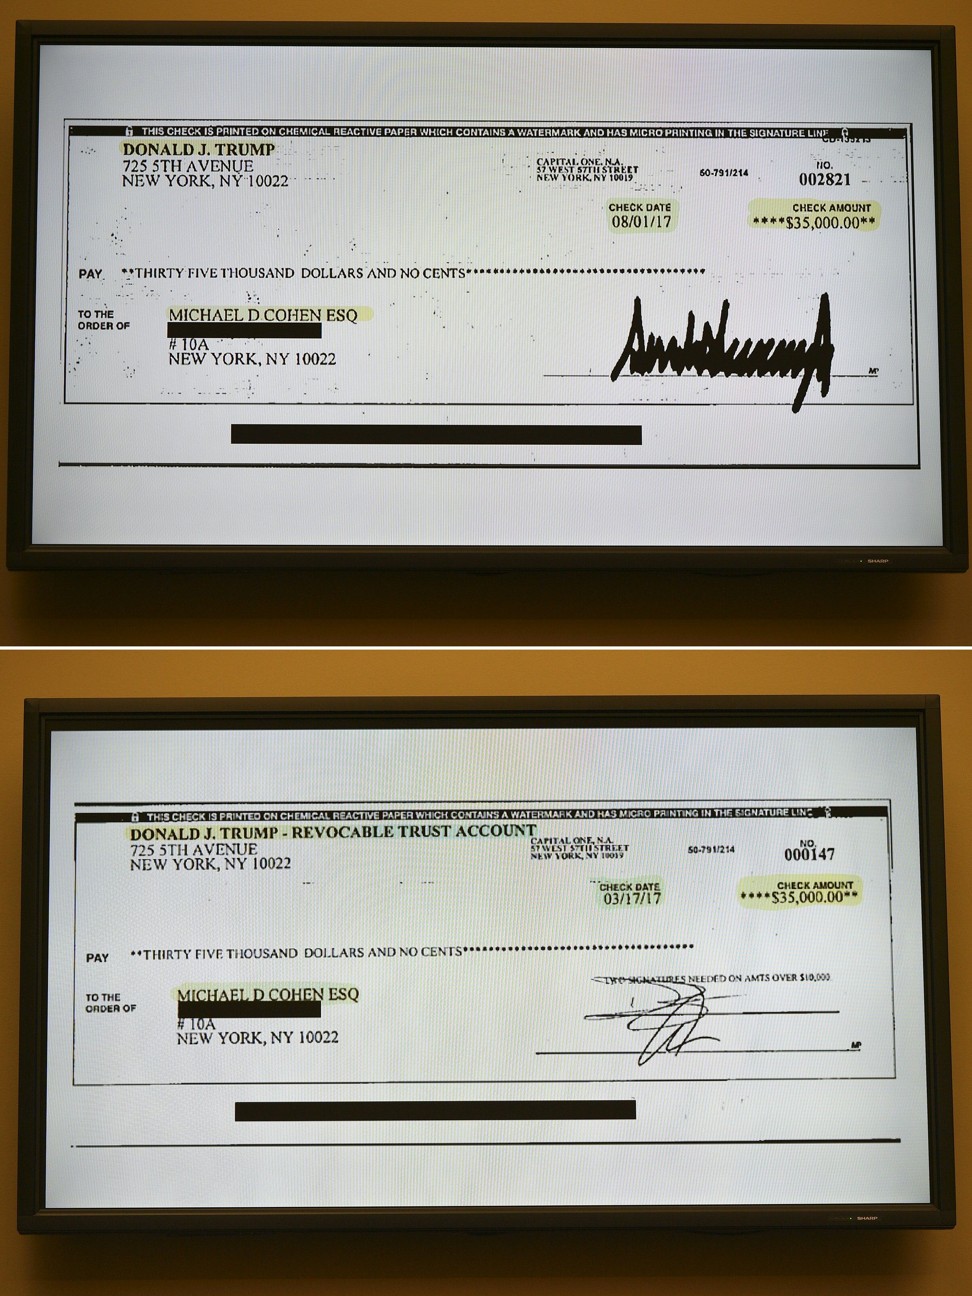 Photos flashed on a screen during Michael Cohen's testimony. The top image shows a cheque signed by Donald Trump in 2017, the bottom cheque was signed by Donald Trump Jnr; Cohen says they were reimbursement for hush money Cohen paid to a porn star on Trump’s behalf. Photo: AFP